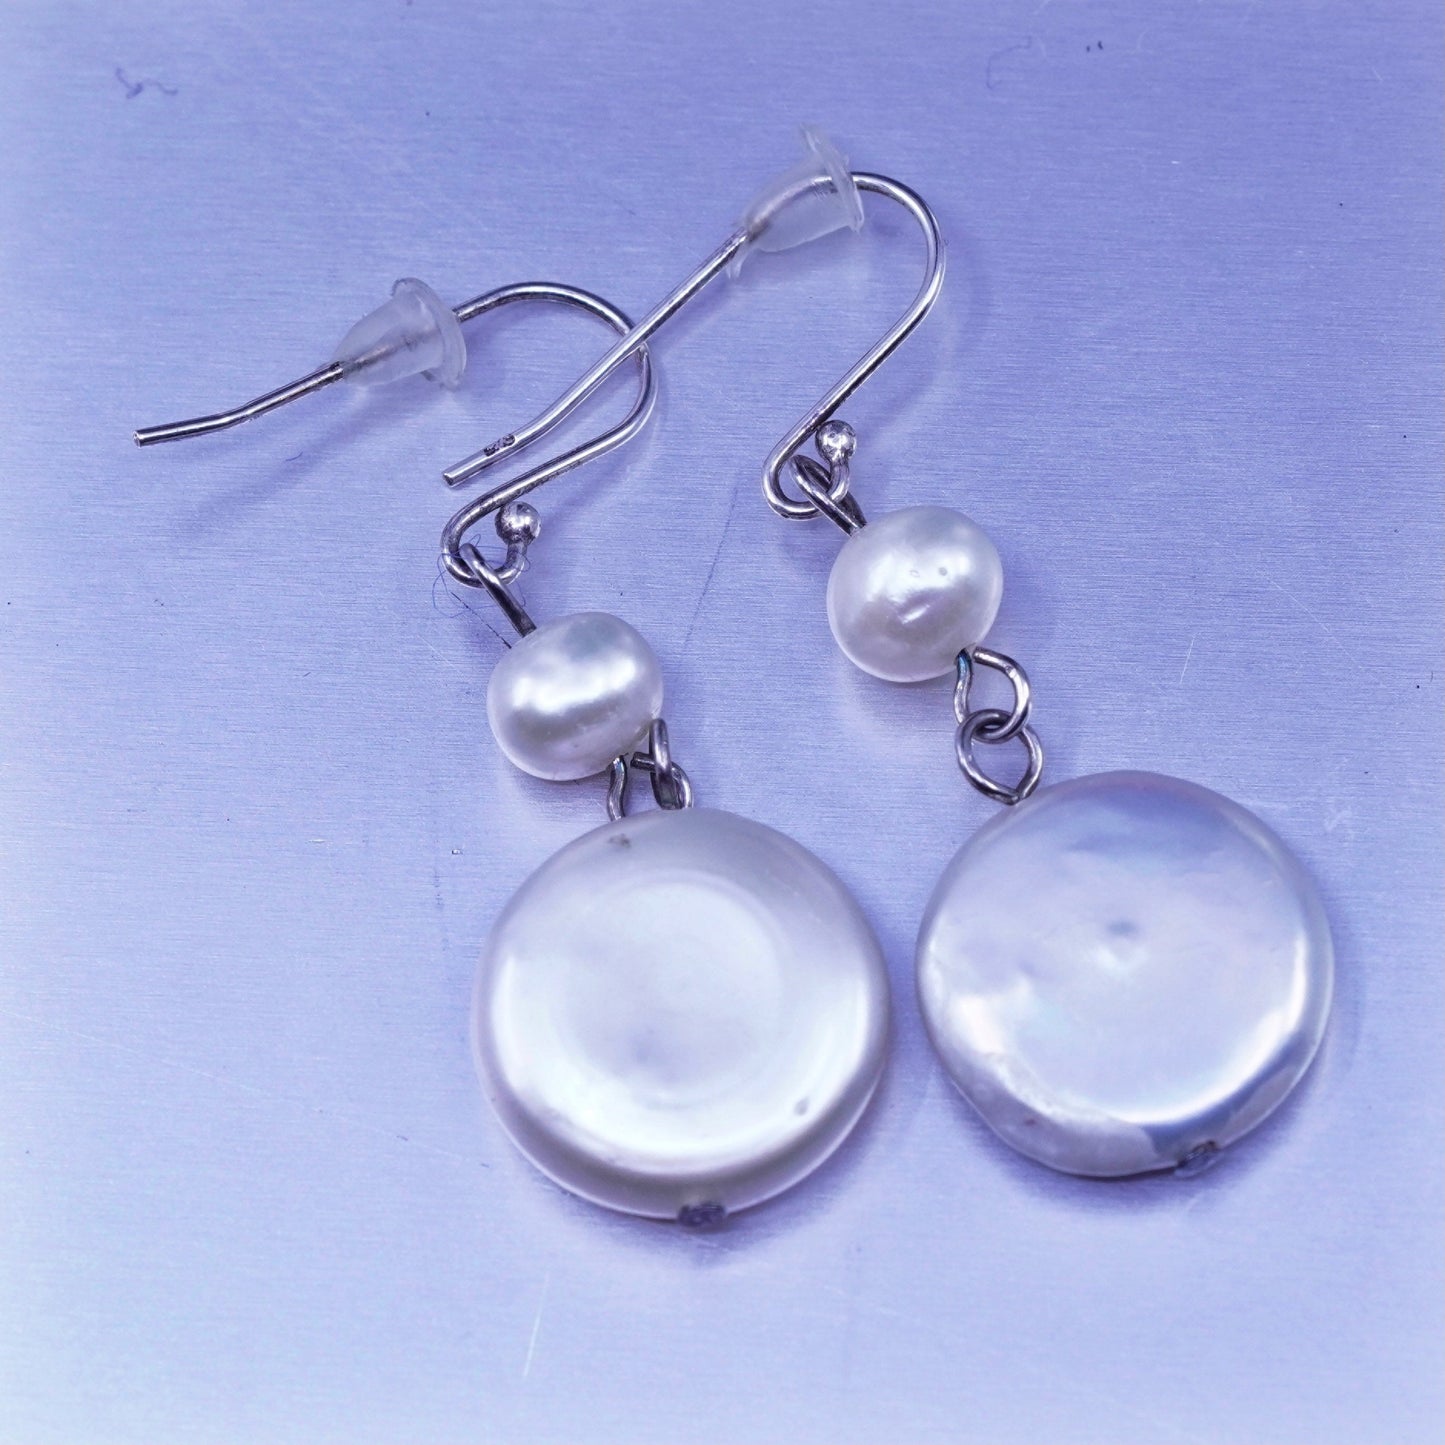 Vintage Sterling 925 silver handmade earrings with coin pearl